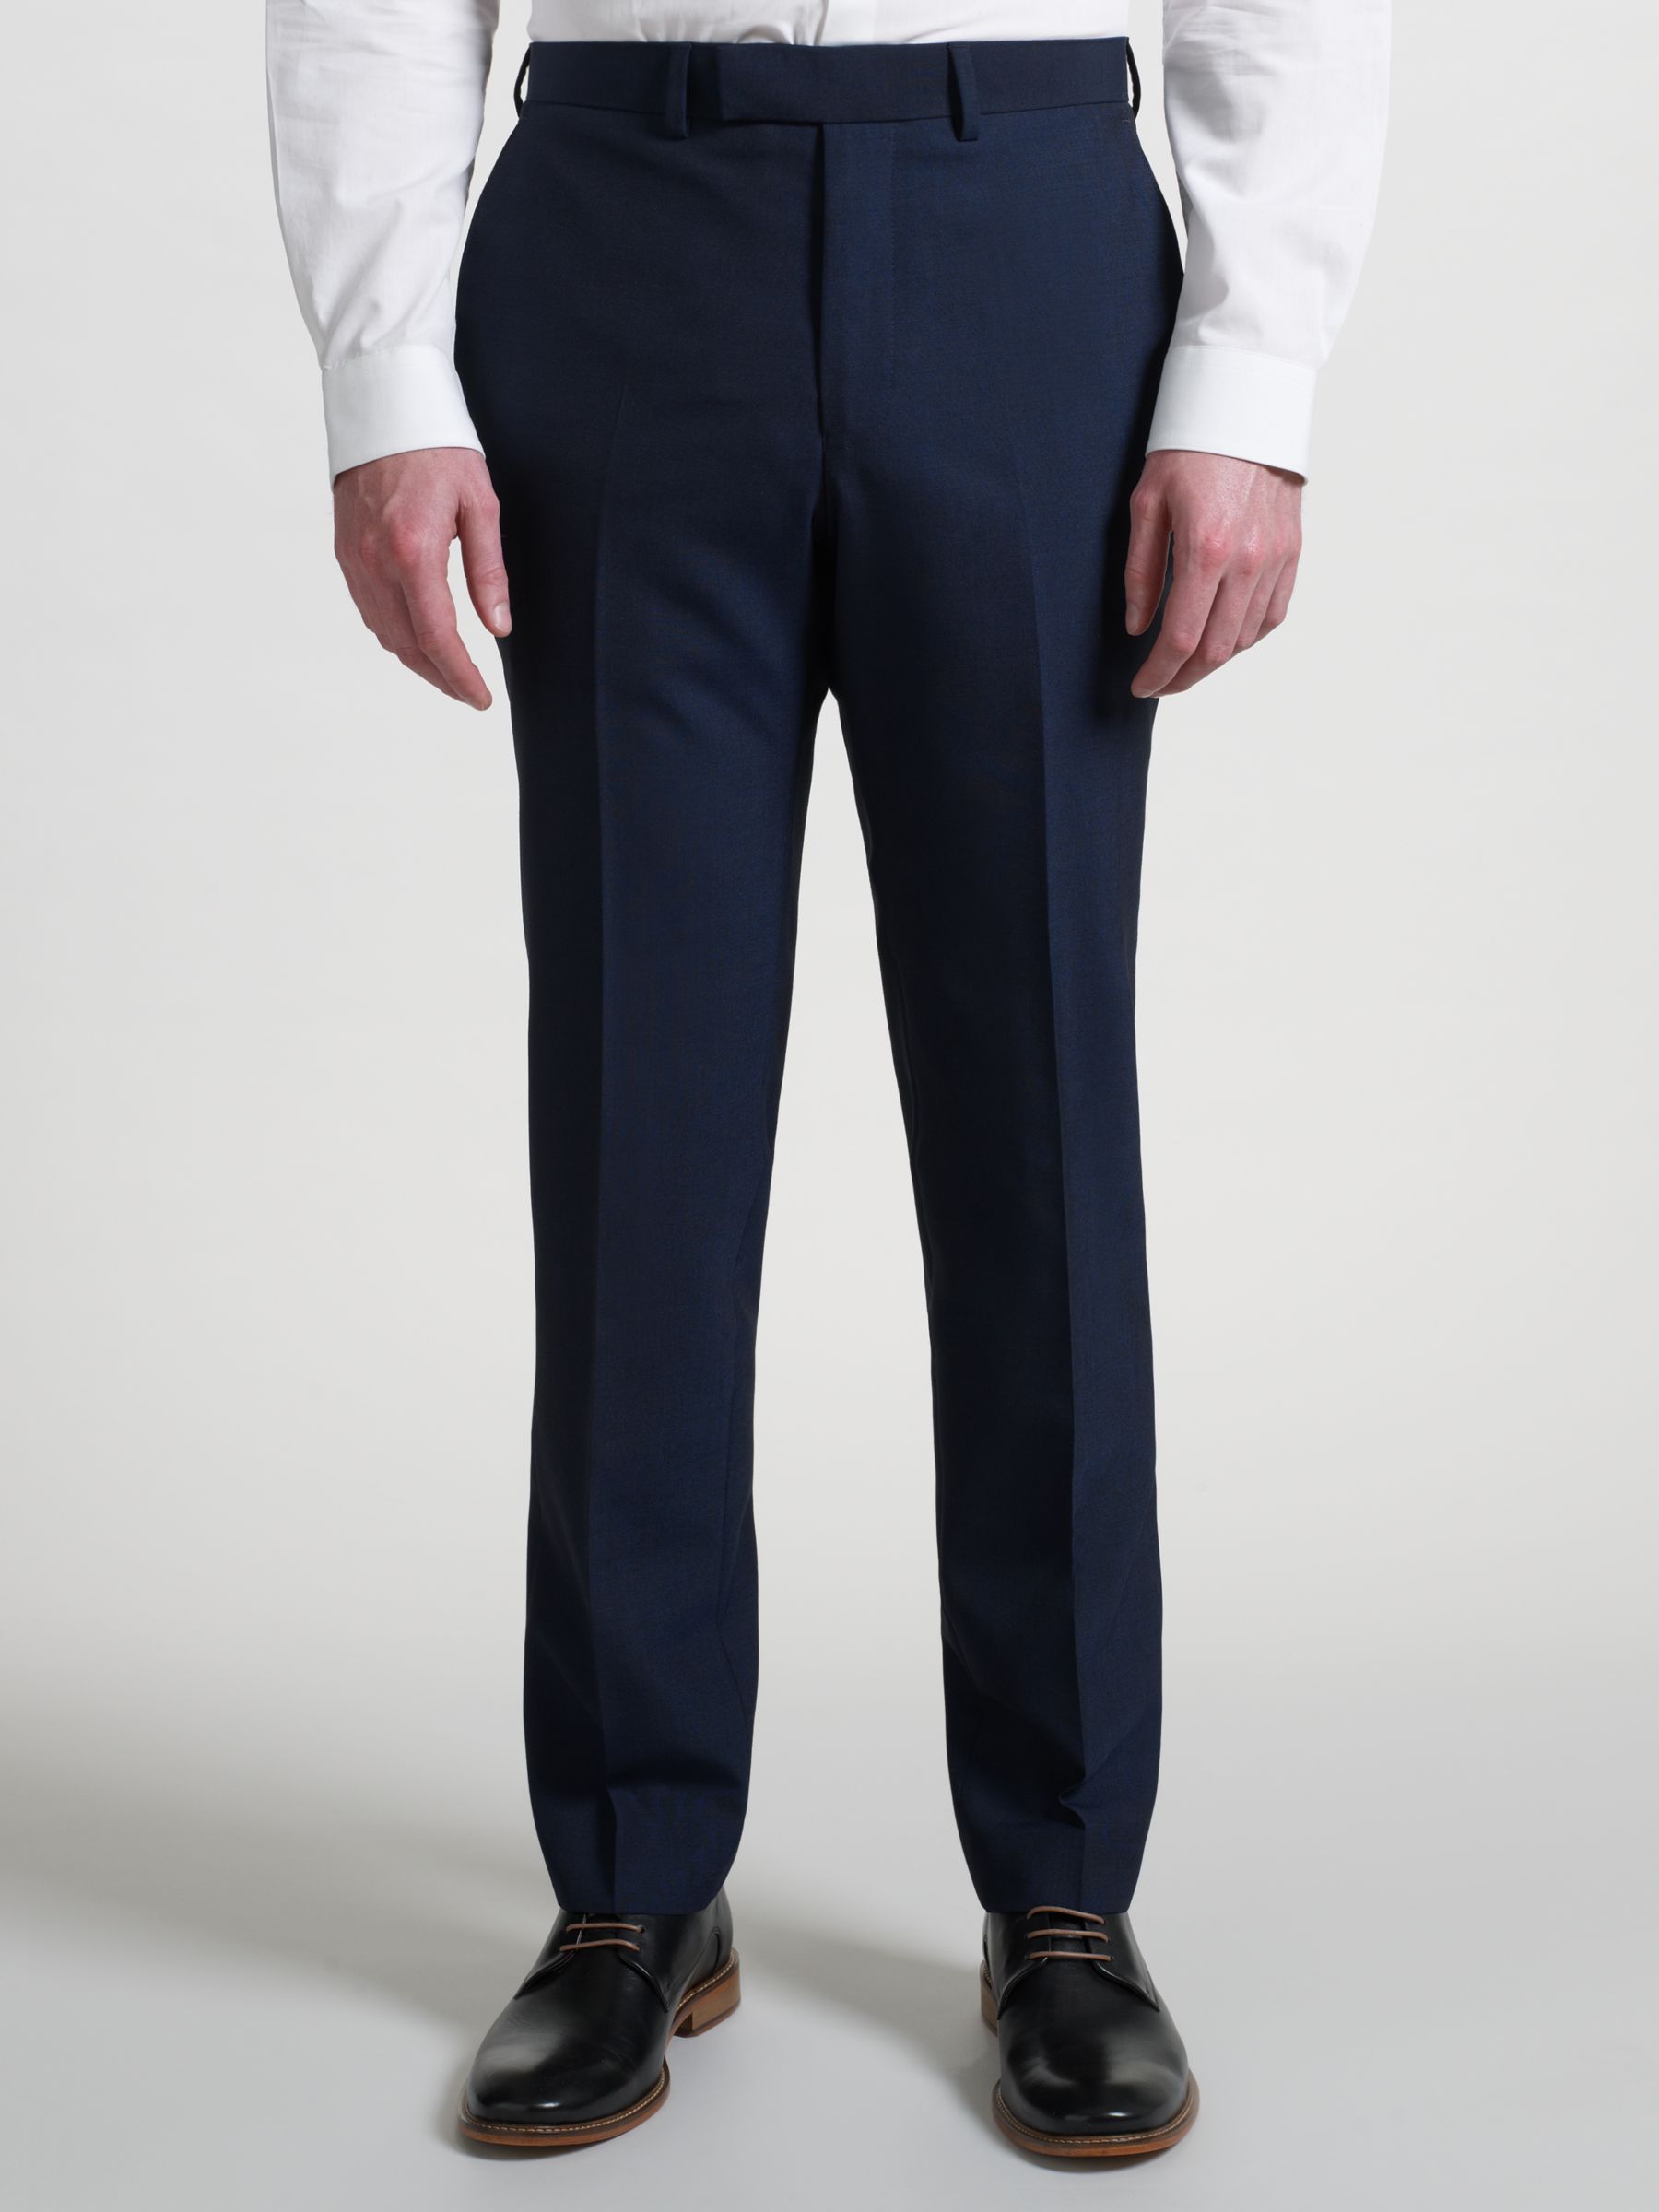 Kin by John Lewis Stamford Tonic Slim Fit Suit Trousers, Midnight Blue ...